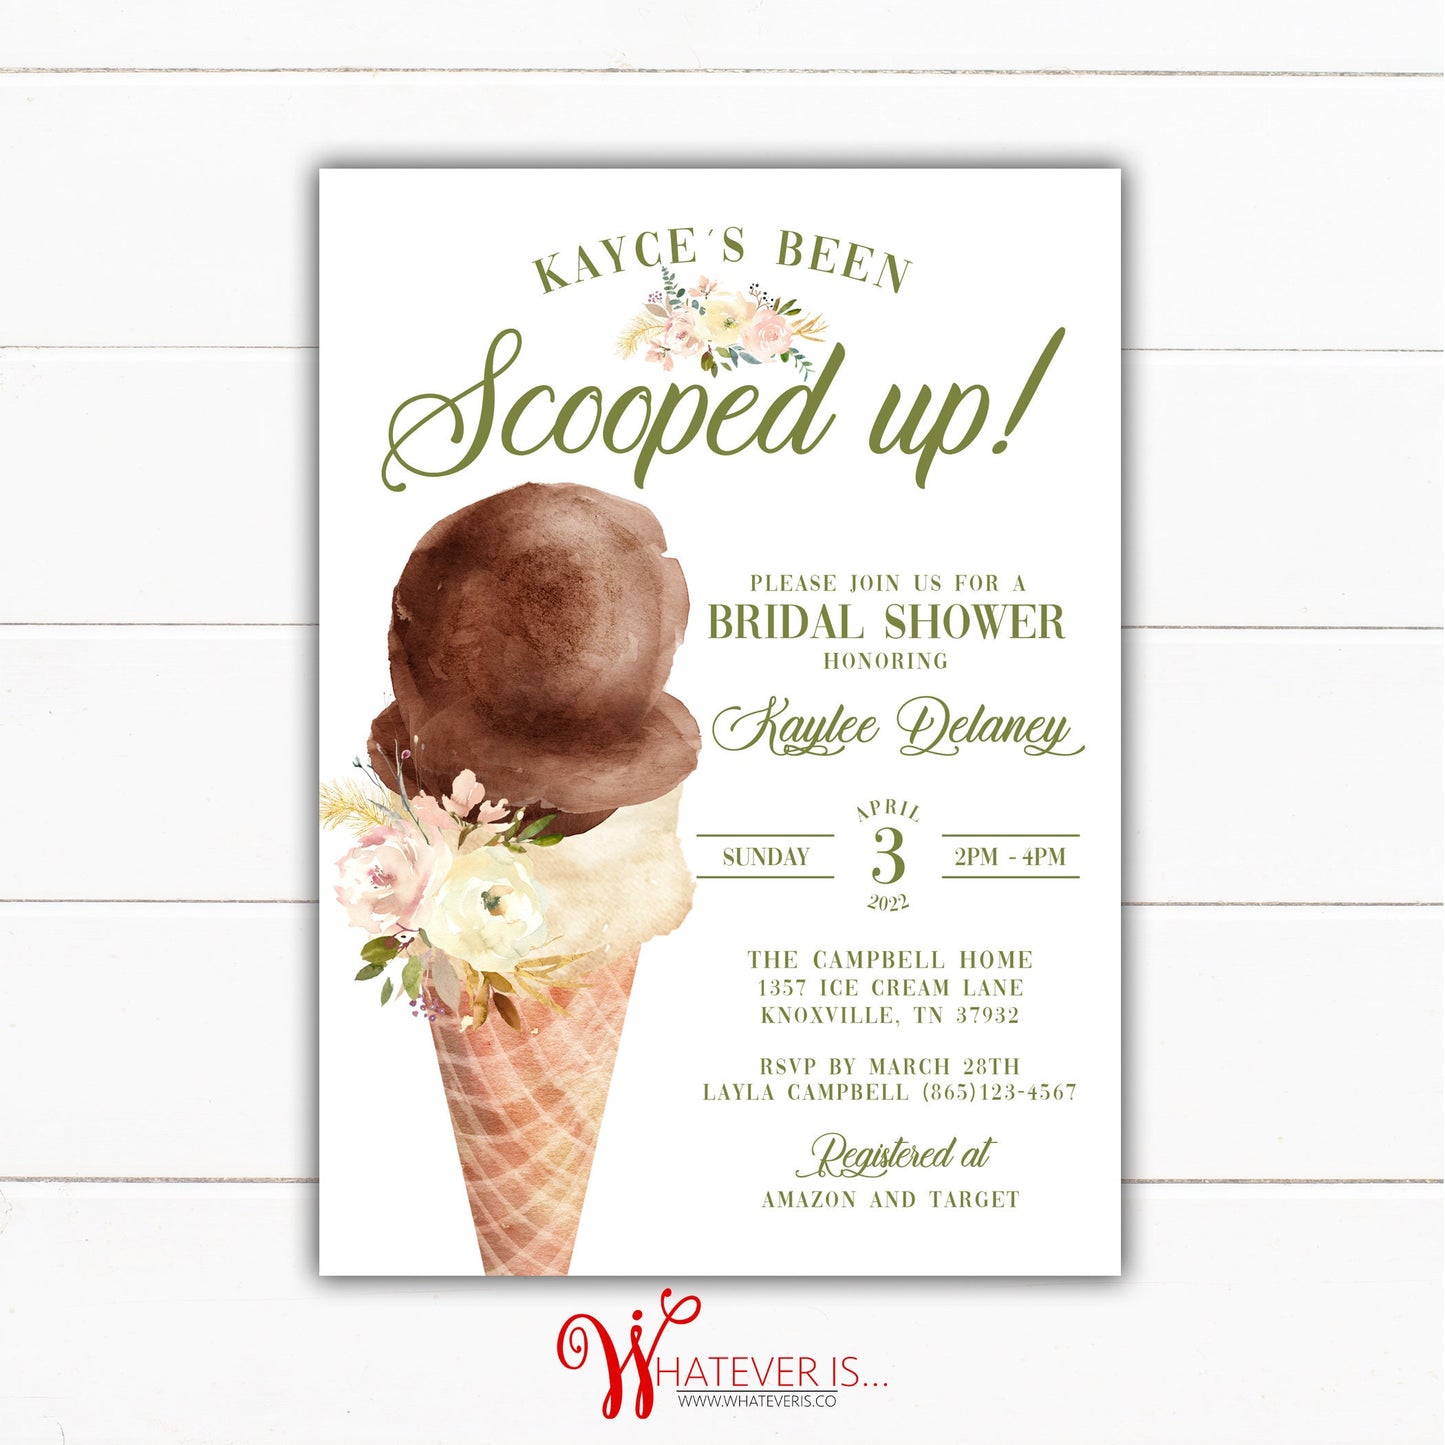 She's Been Scooped Up Bridal Shower Invitations |  Ice Cream Bridal Shower Invitation | Summer Bridal Shower | Ice Cream Wedding Shower